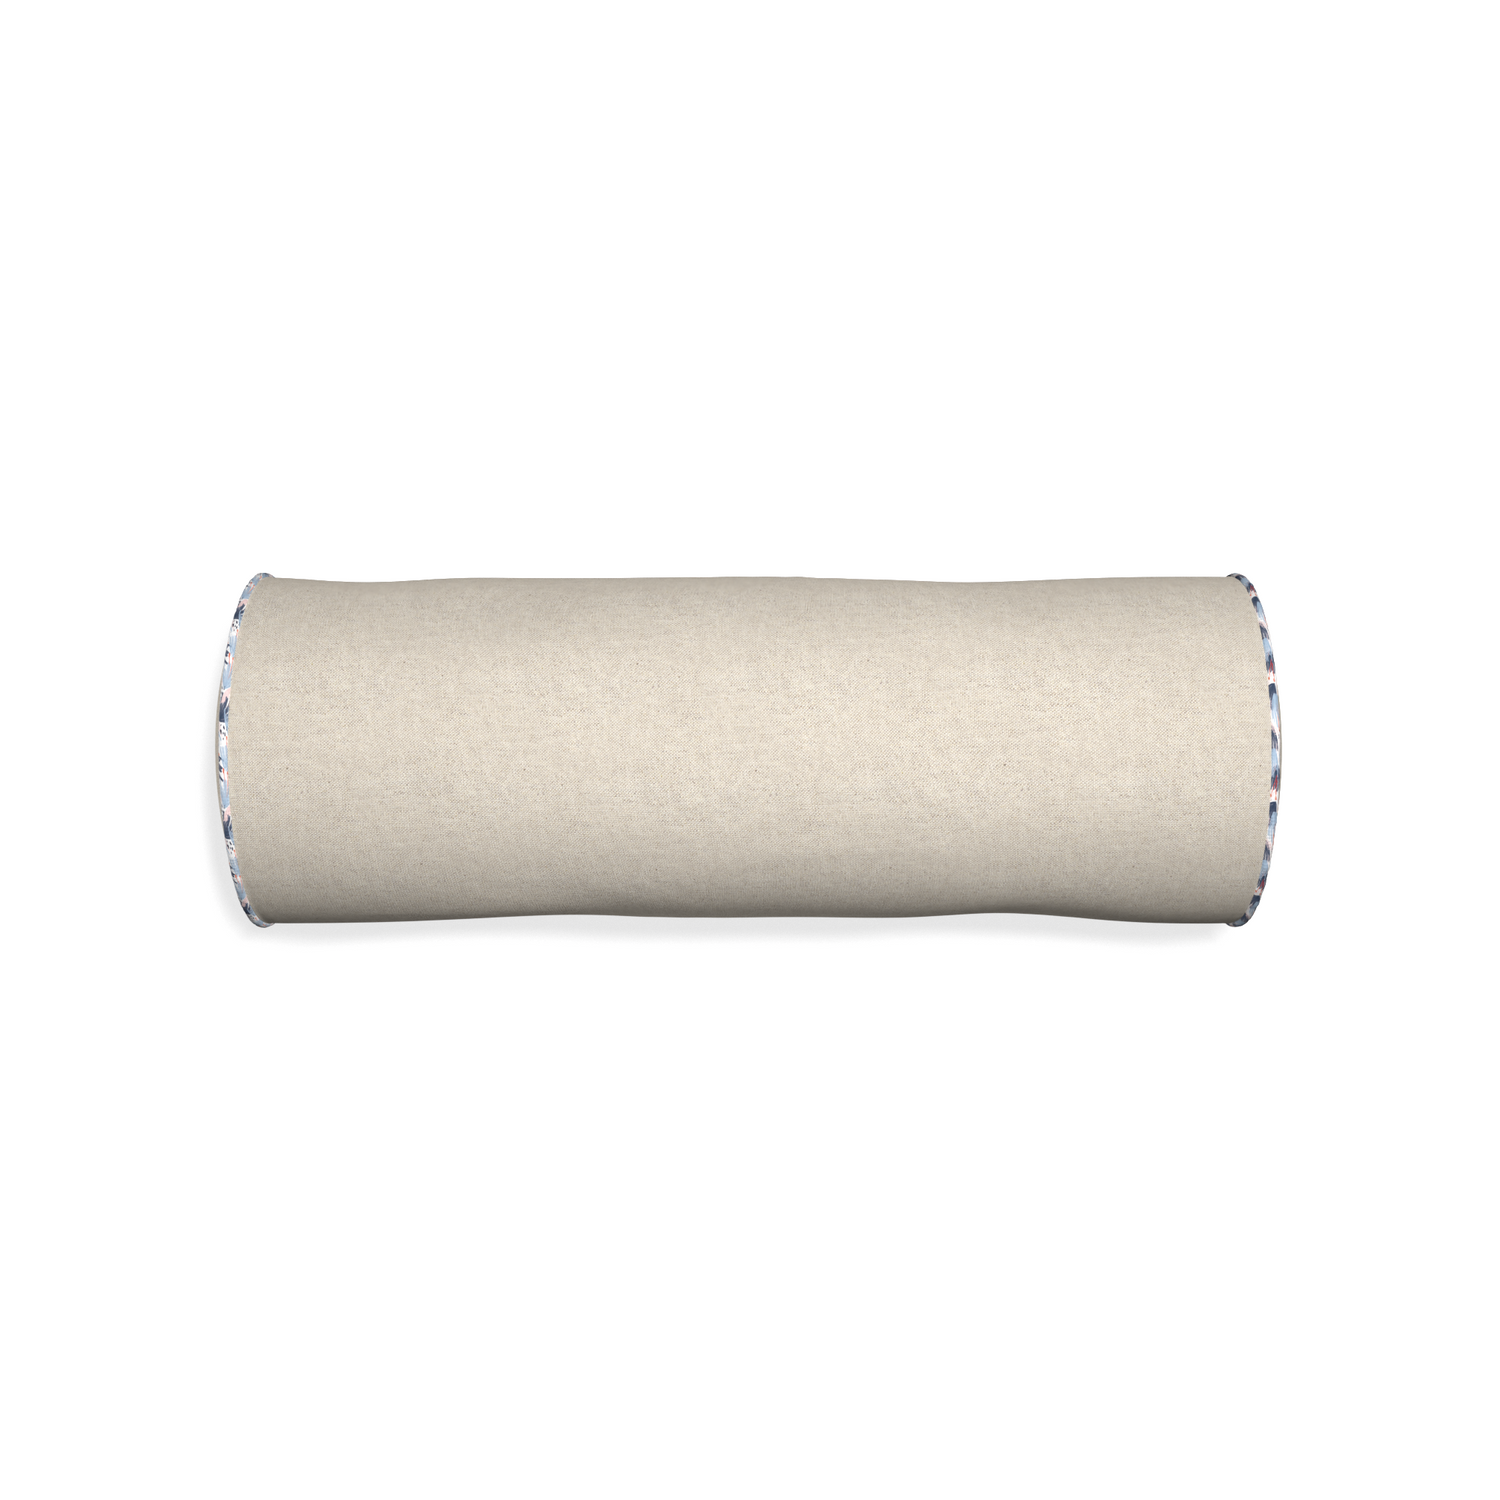 Bolster oat custom light brownpillow with e piping on white background